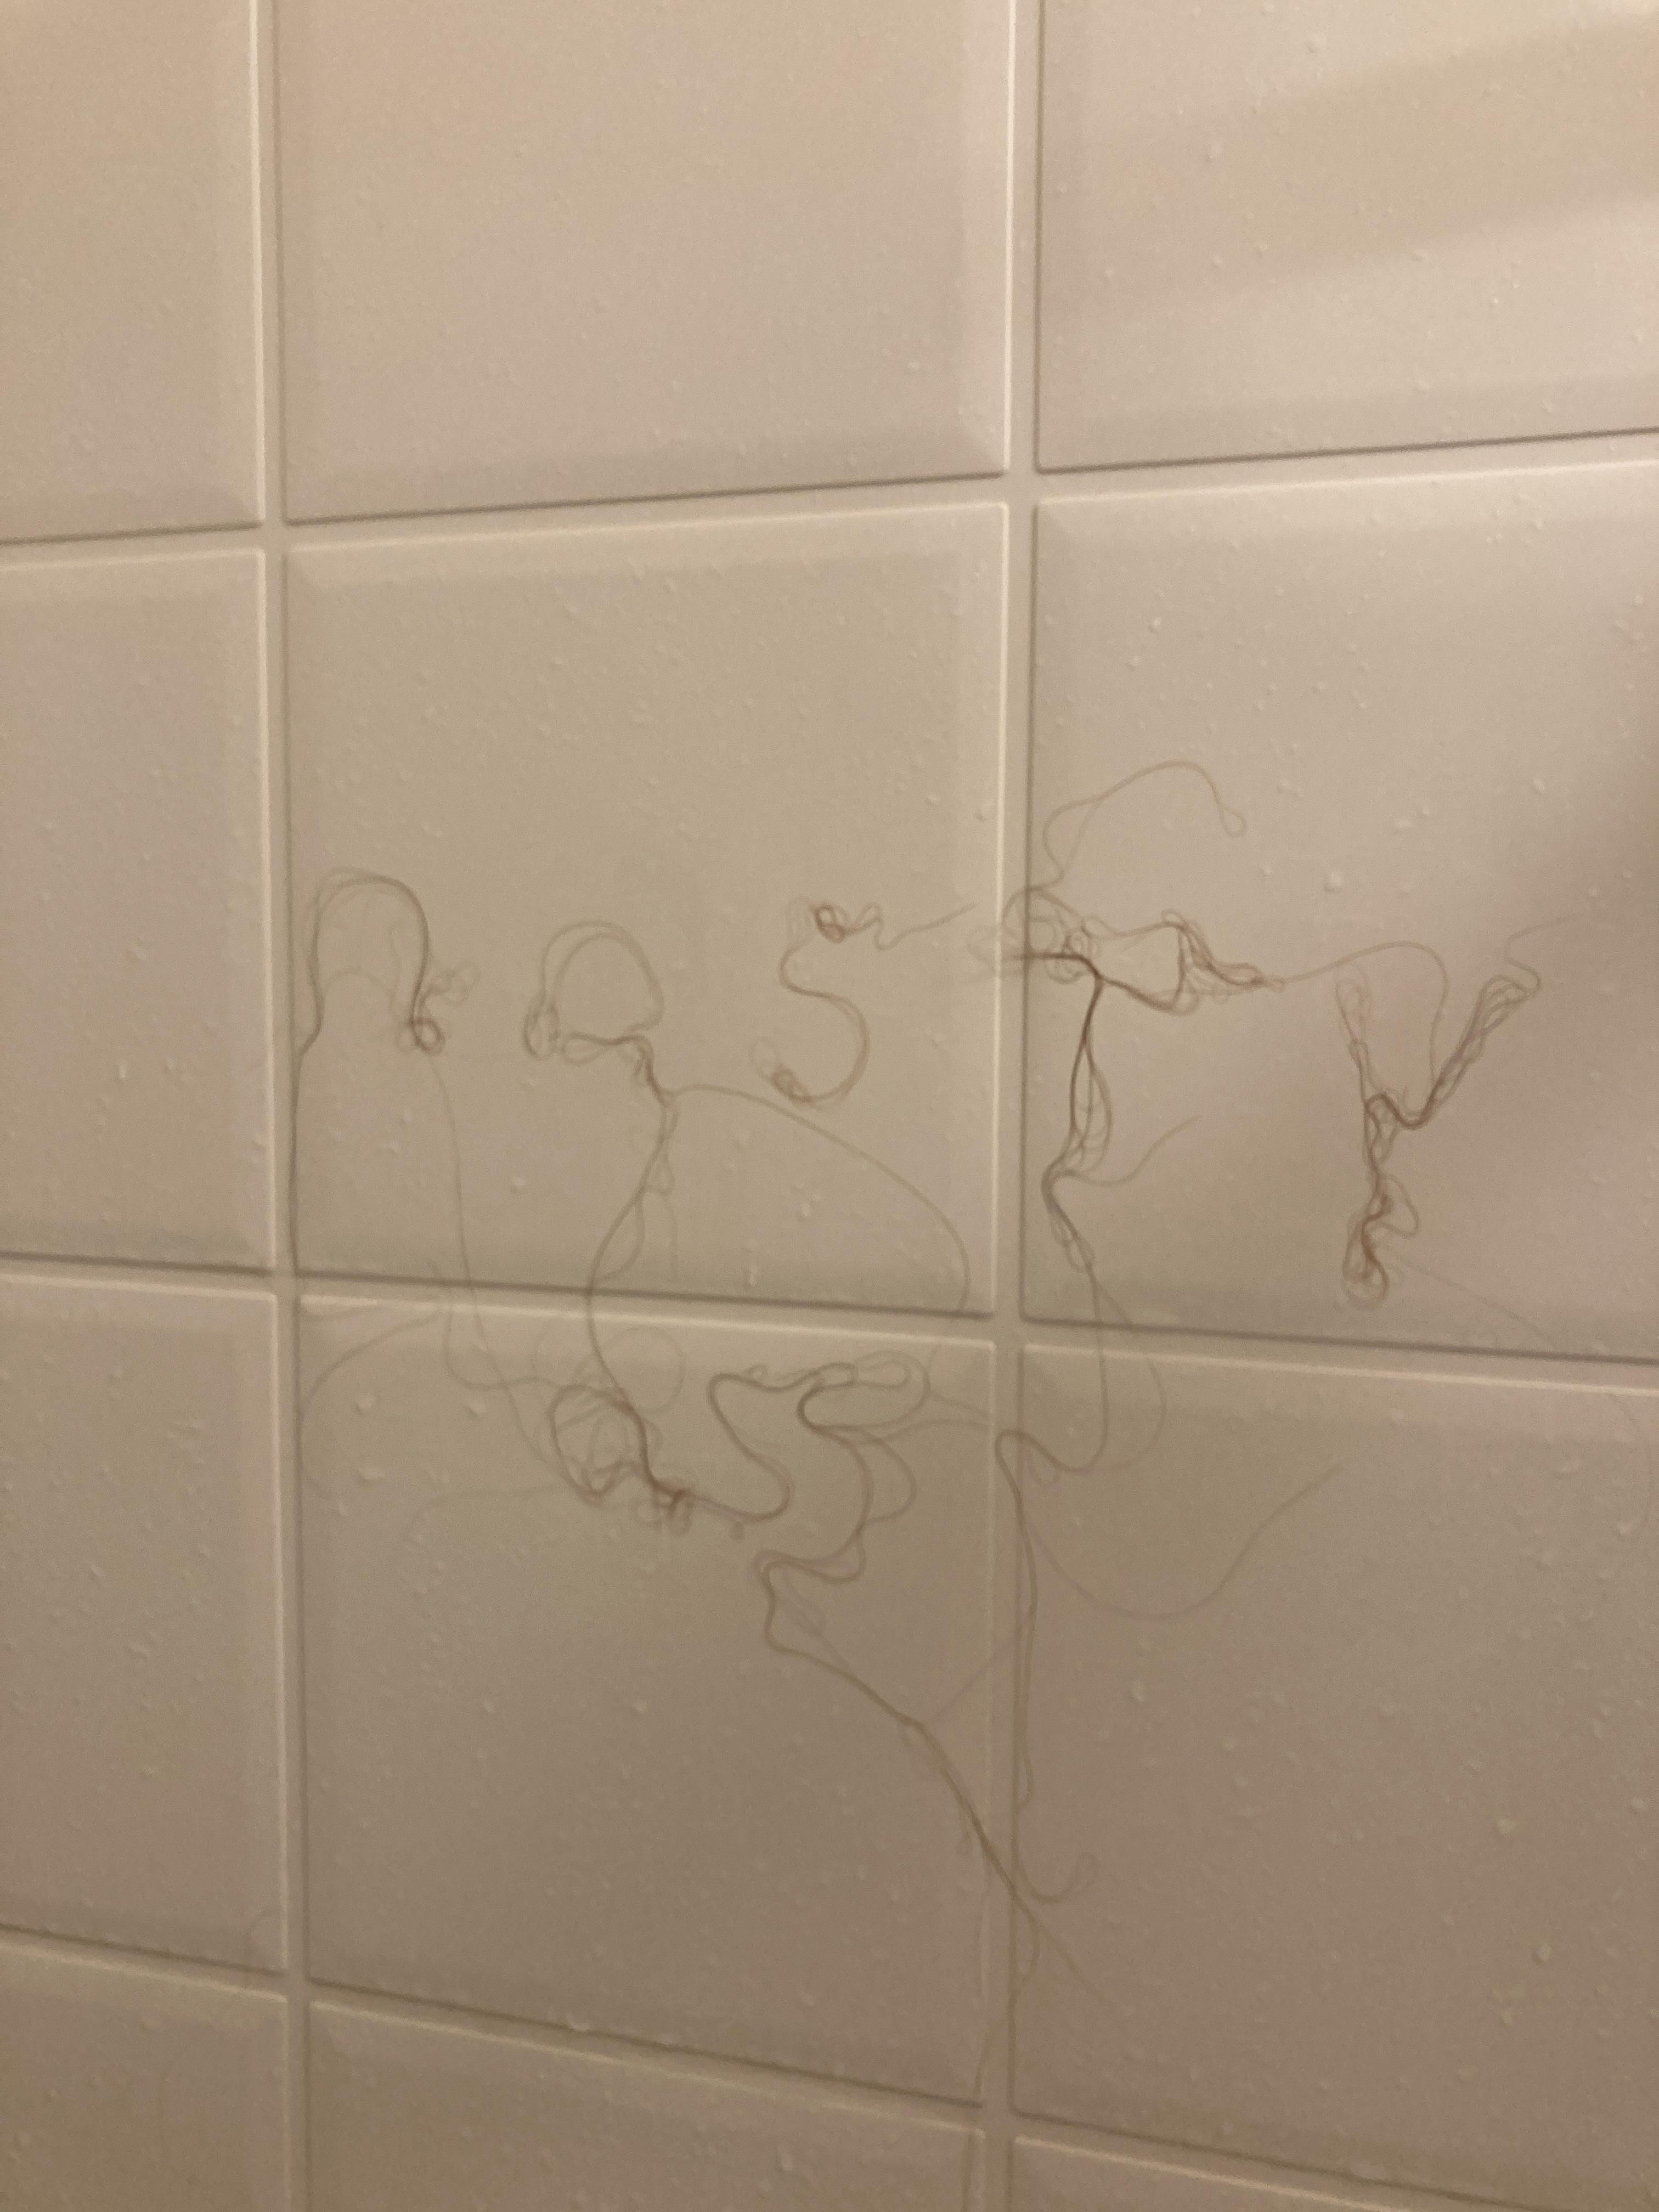 My wife leaves her hair on the shower wall so I decided to leave her a message the next time she takes one.